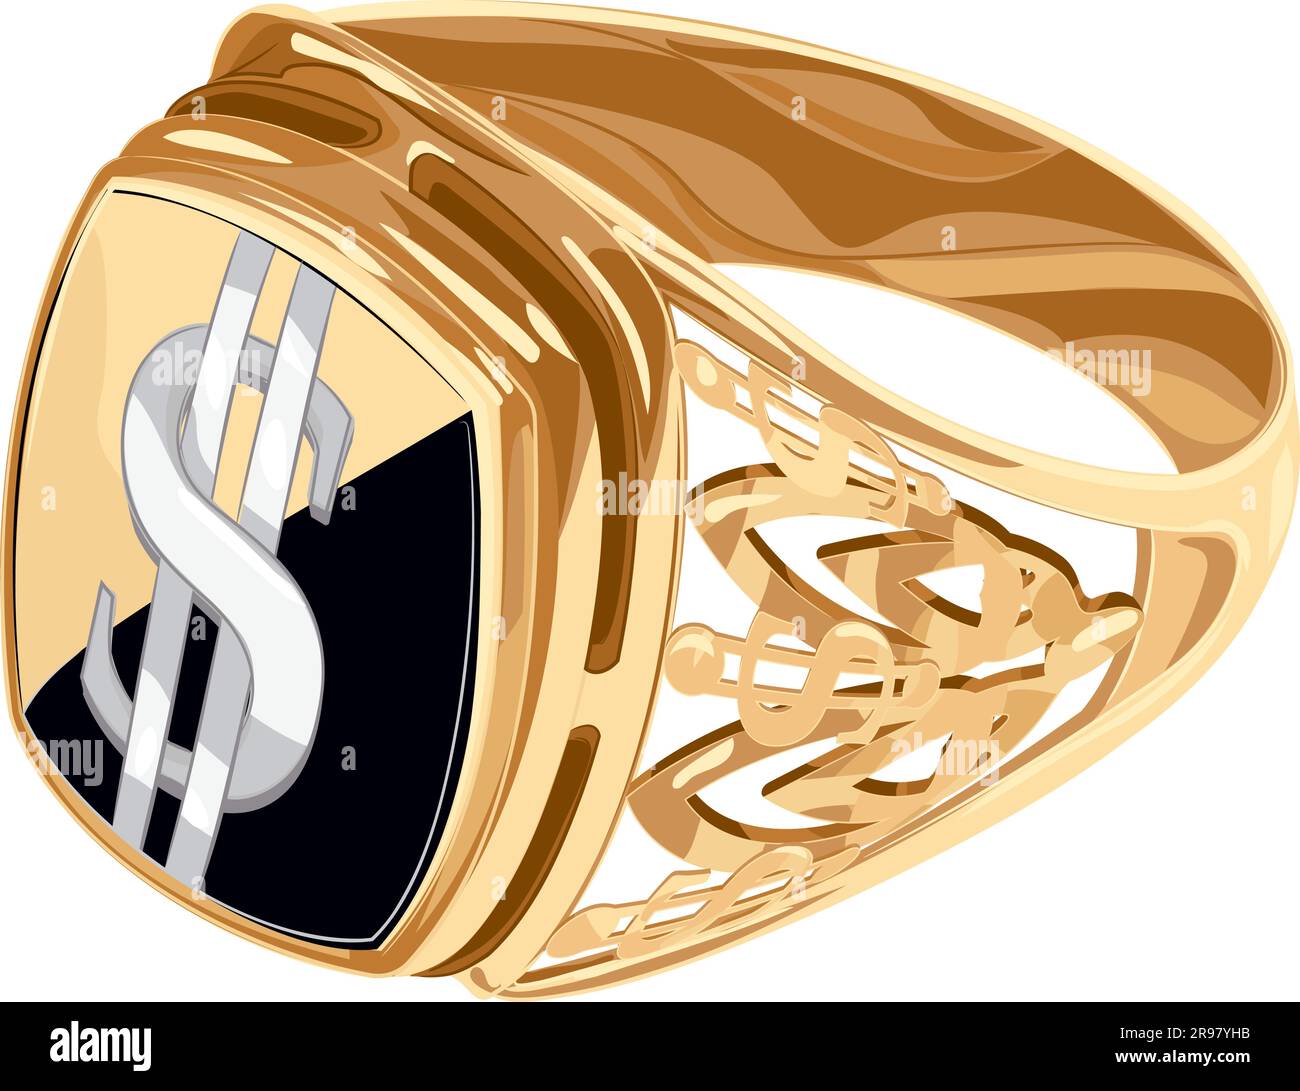 Buckley Gold Signet Ring | Oxendales